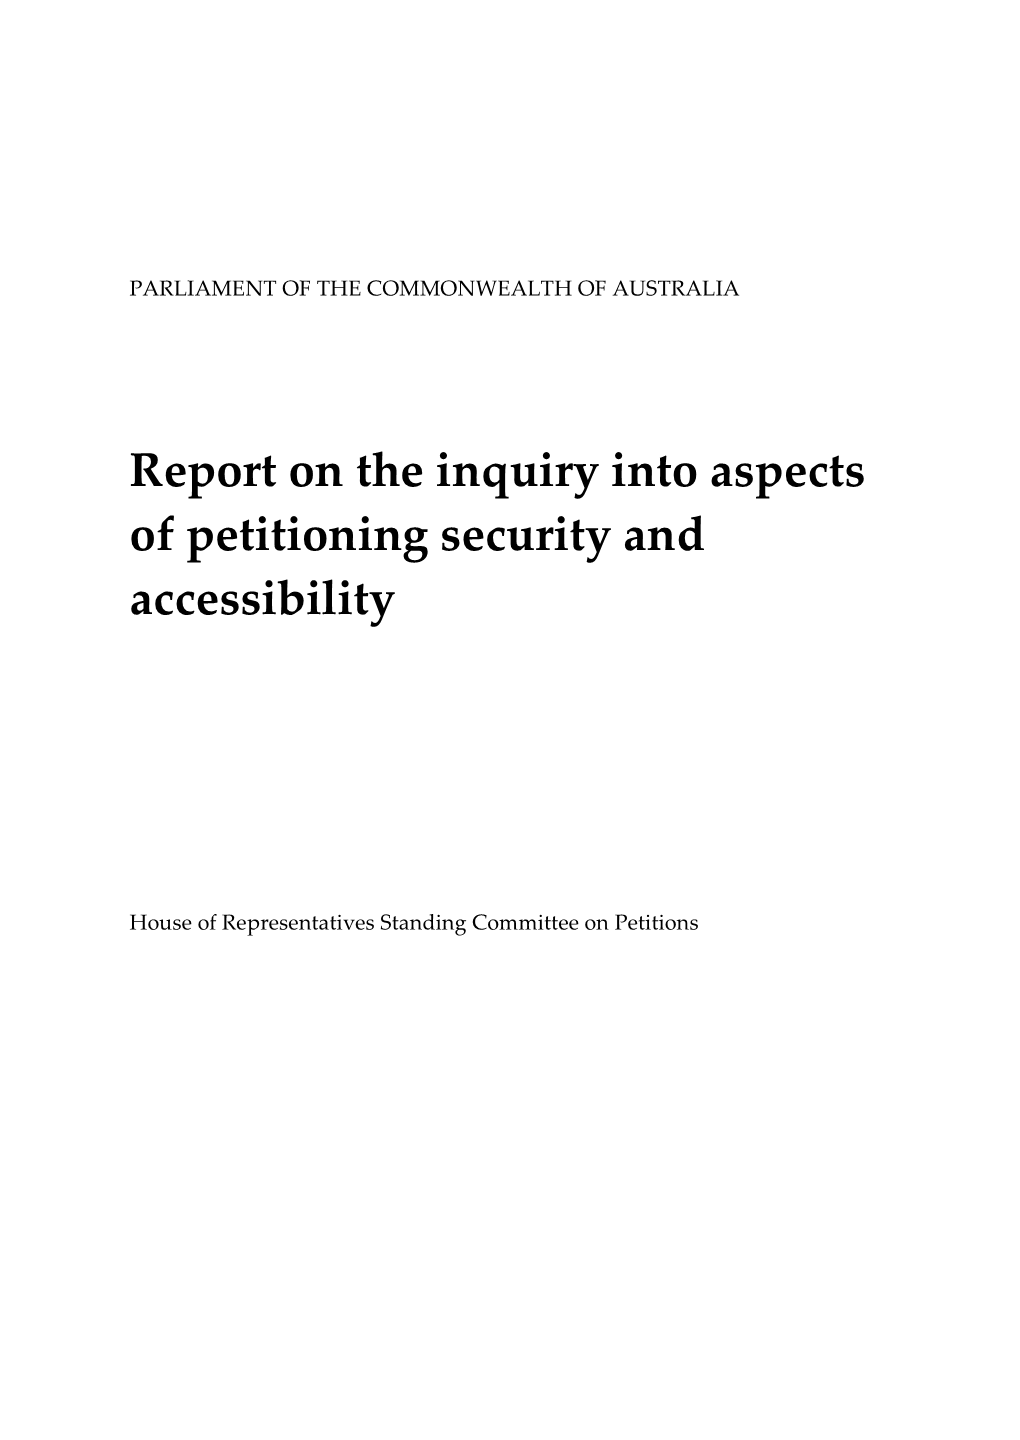 Report on the Inquiry Into Aspects of Petitioning Security and Accessibility